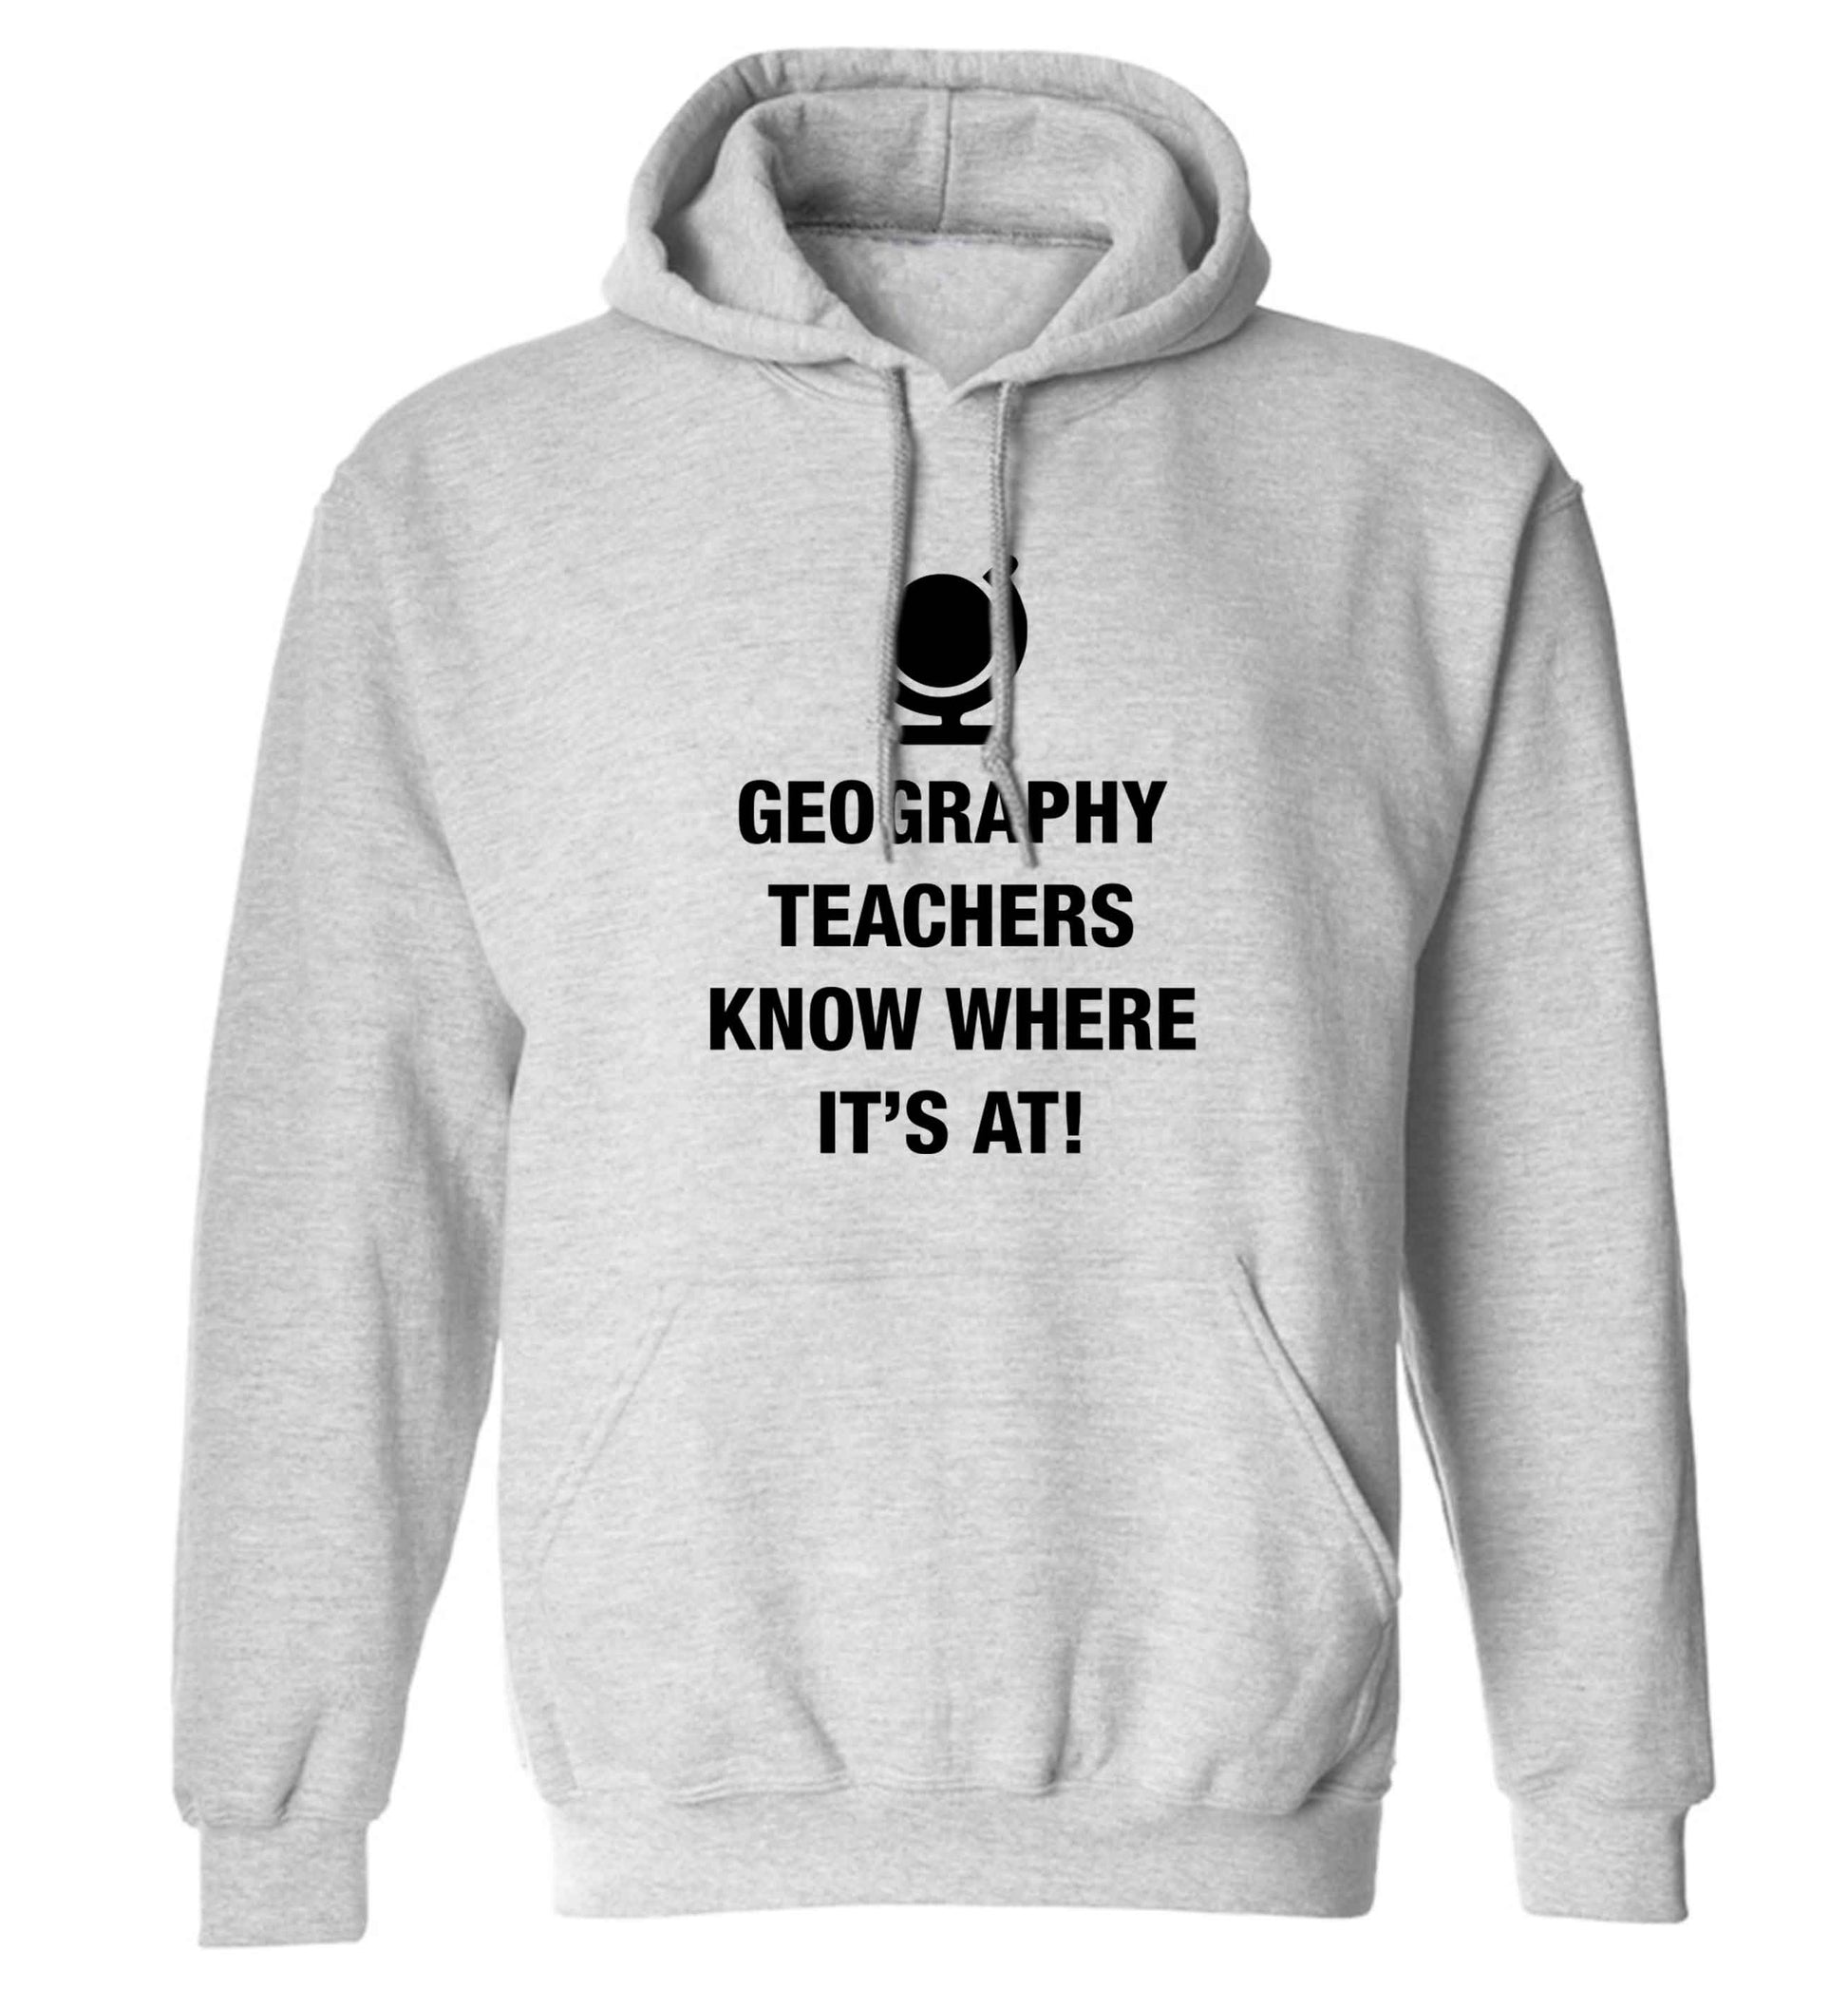 Geography teachers know where it's at adults unisex grey hoodie 2XL